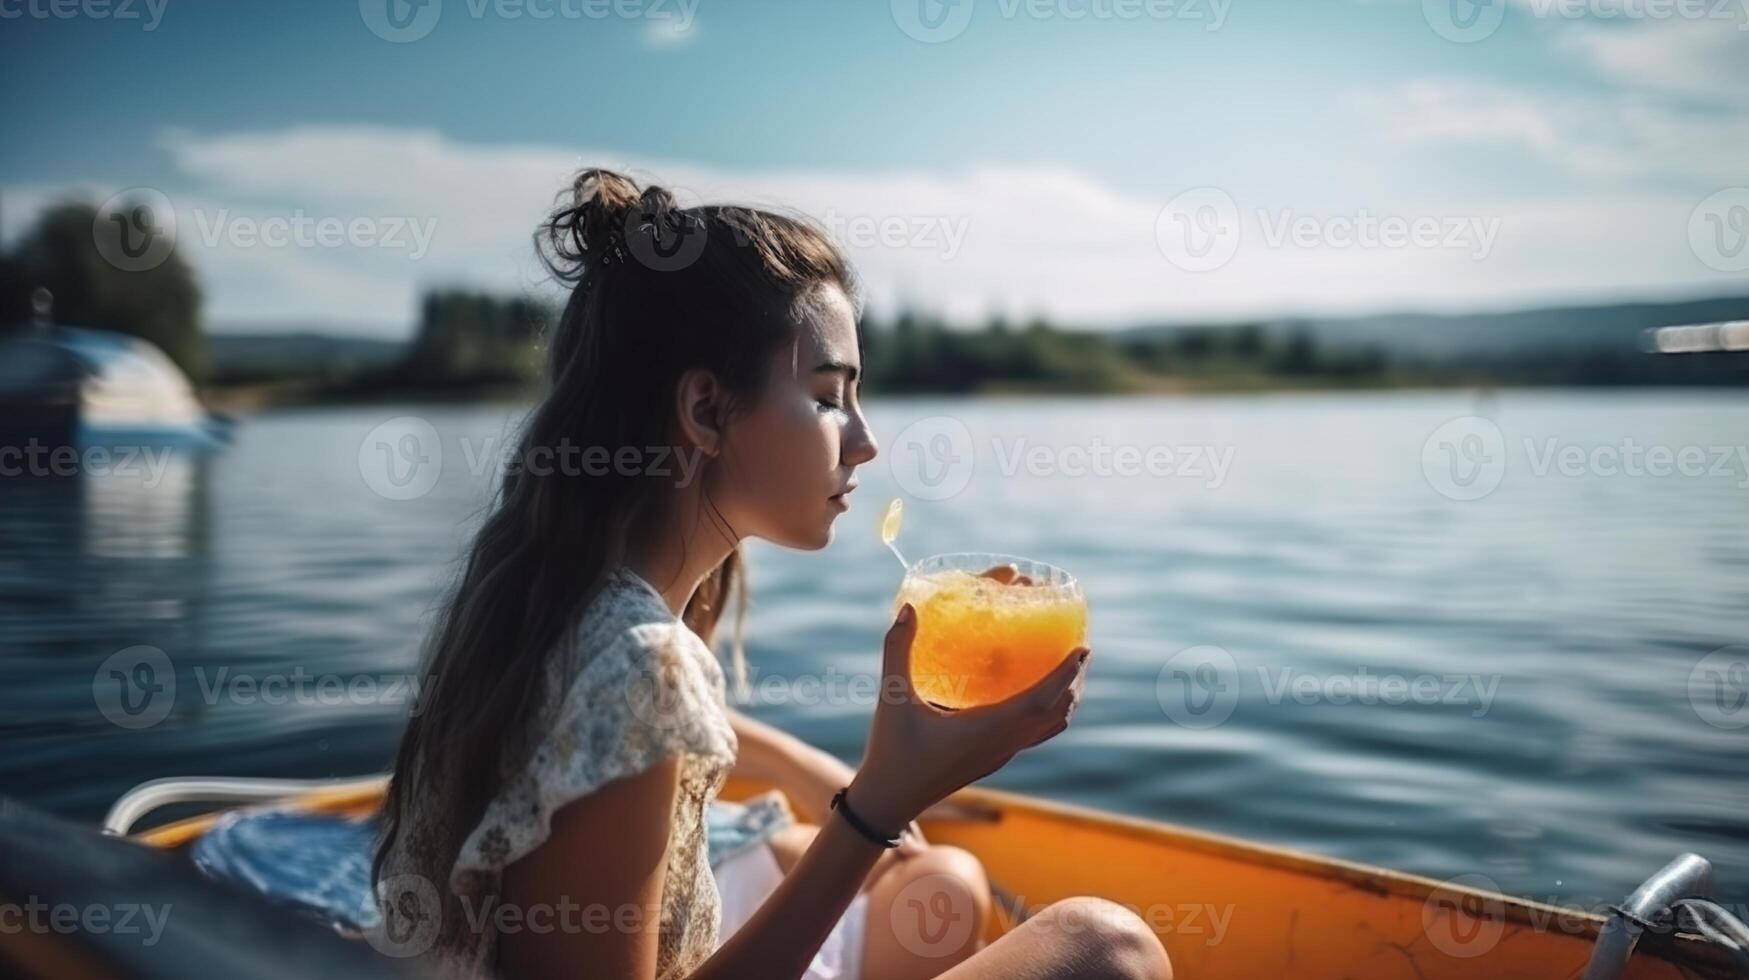 , the girl is holding a refreshing juice as she enjoys the beautiful scenery. photo